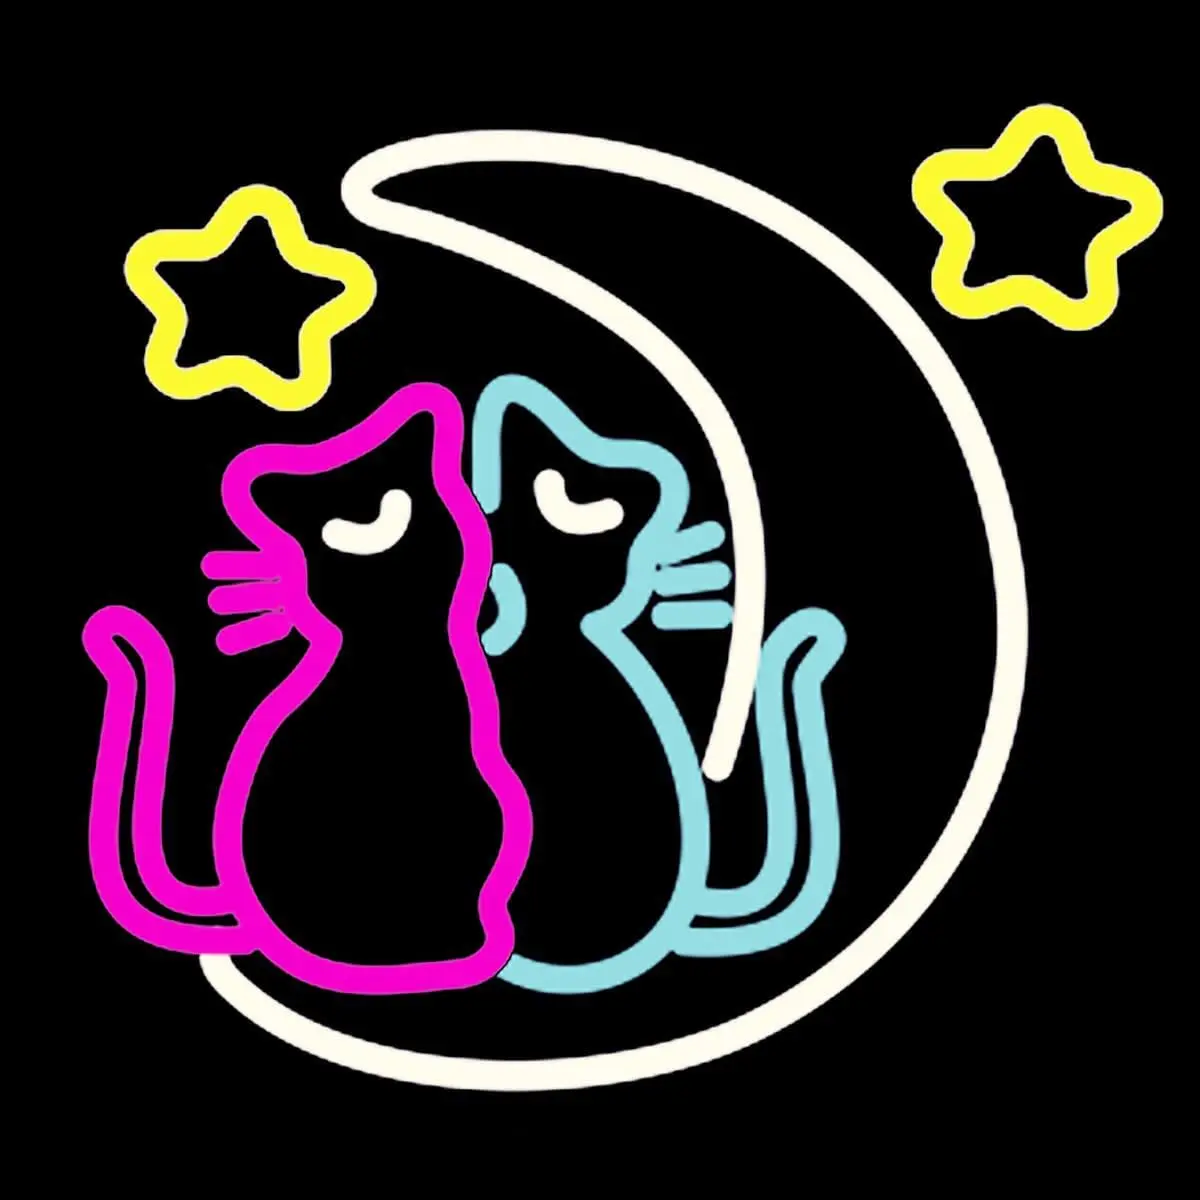 

Anime Sailor Moon Cat Luna Neon Lights LED Sign Party Acrylic Neon Girl Bedroom Room Game Room Wall Decoration Birthday Gift